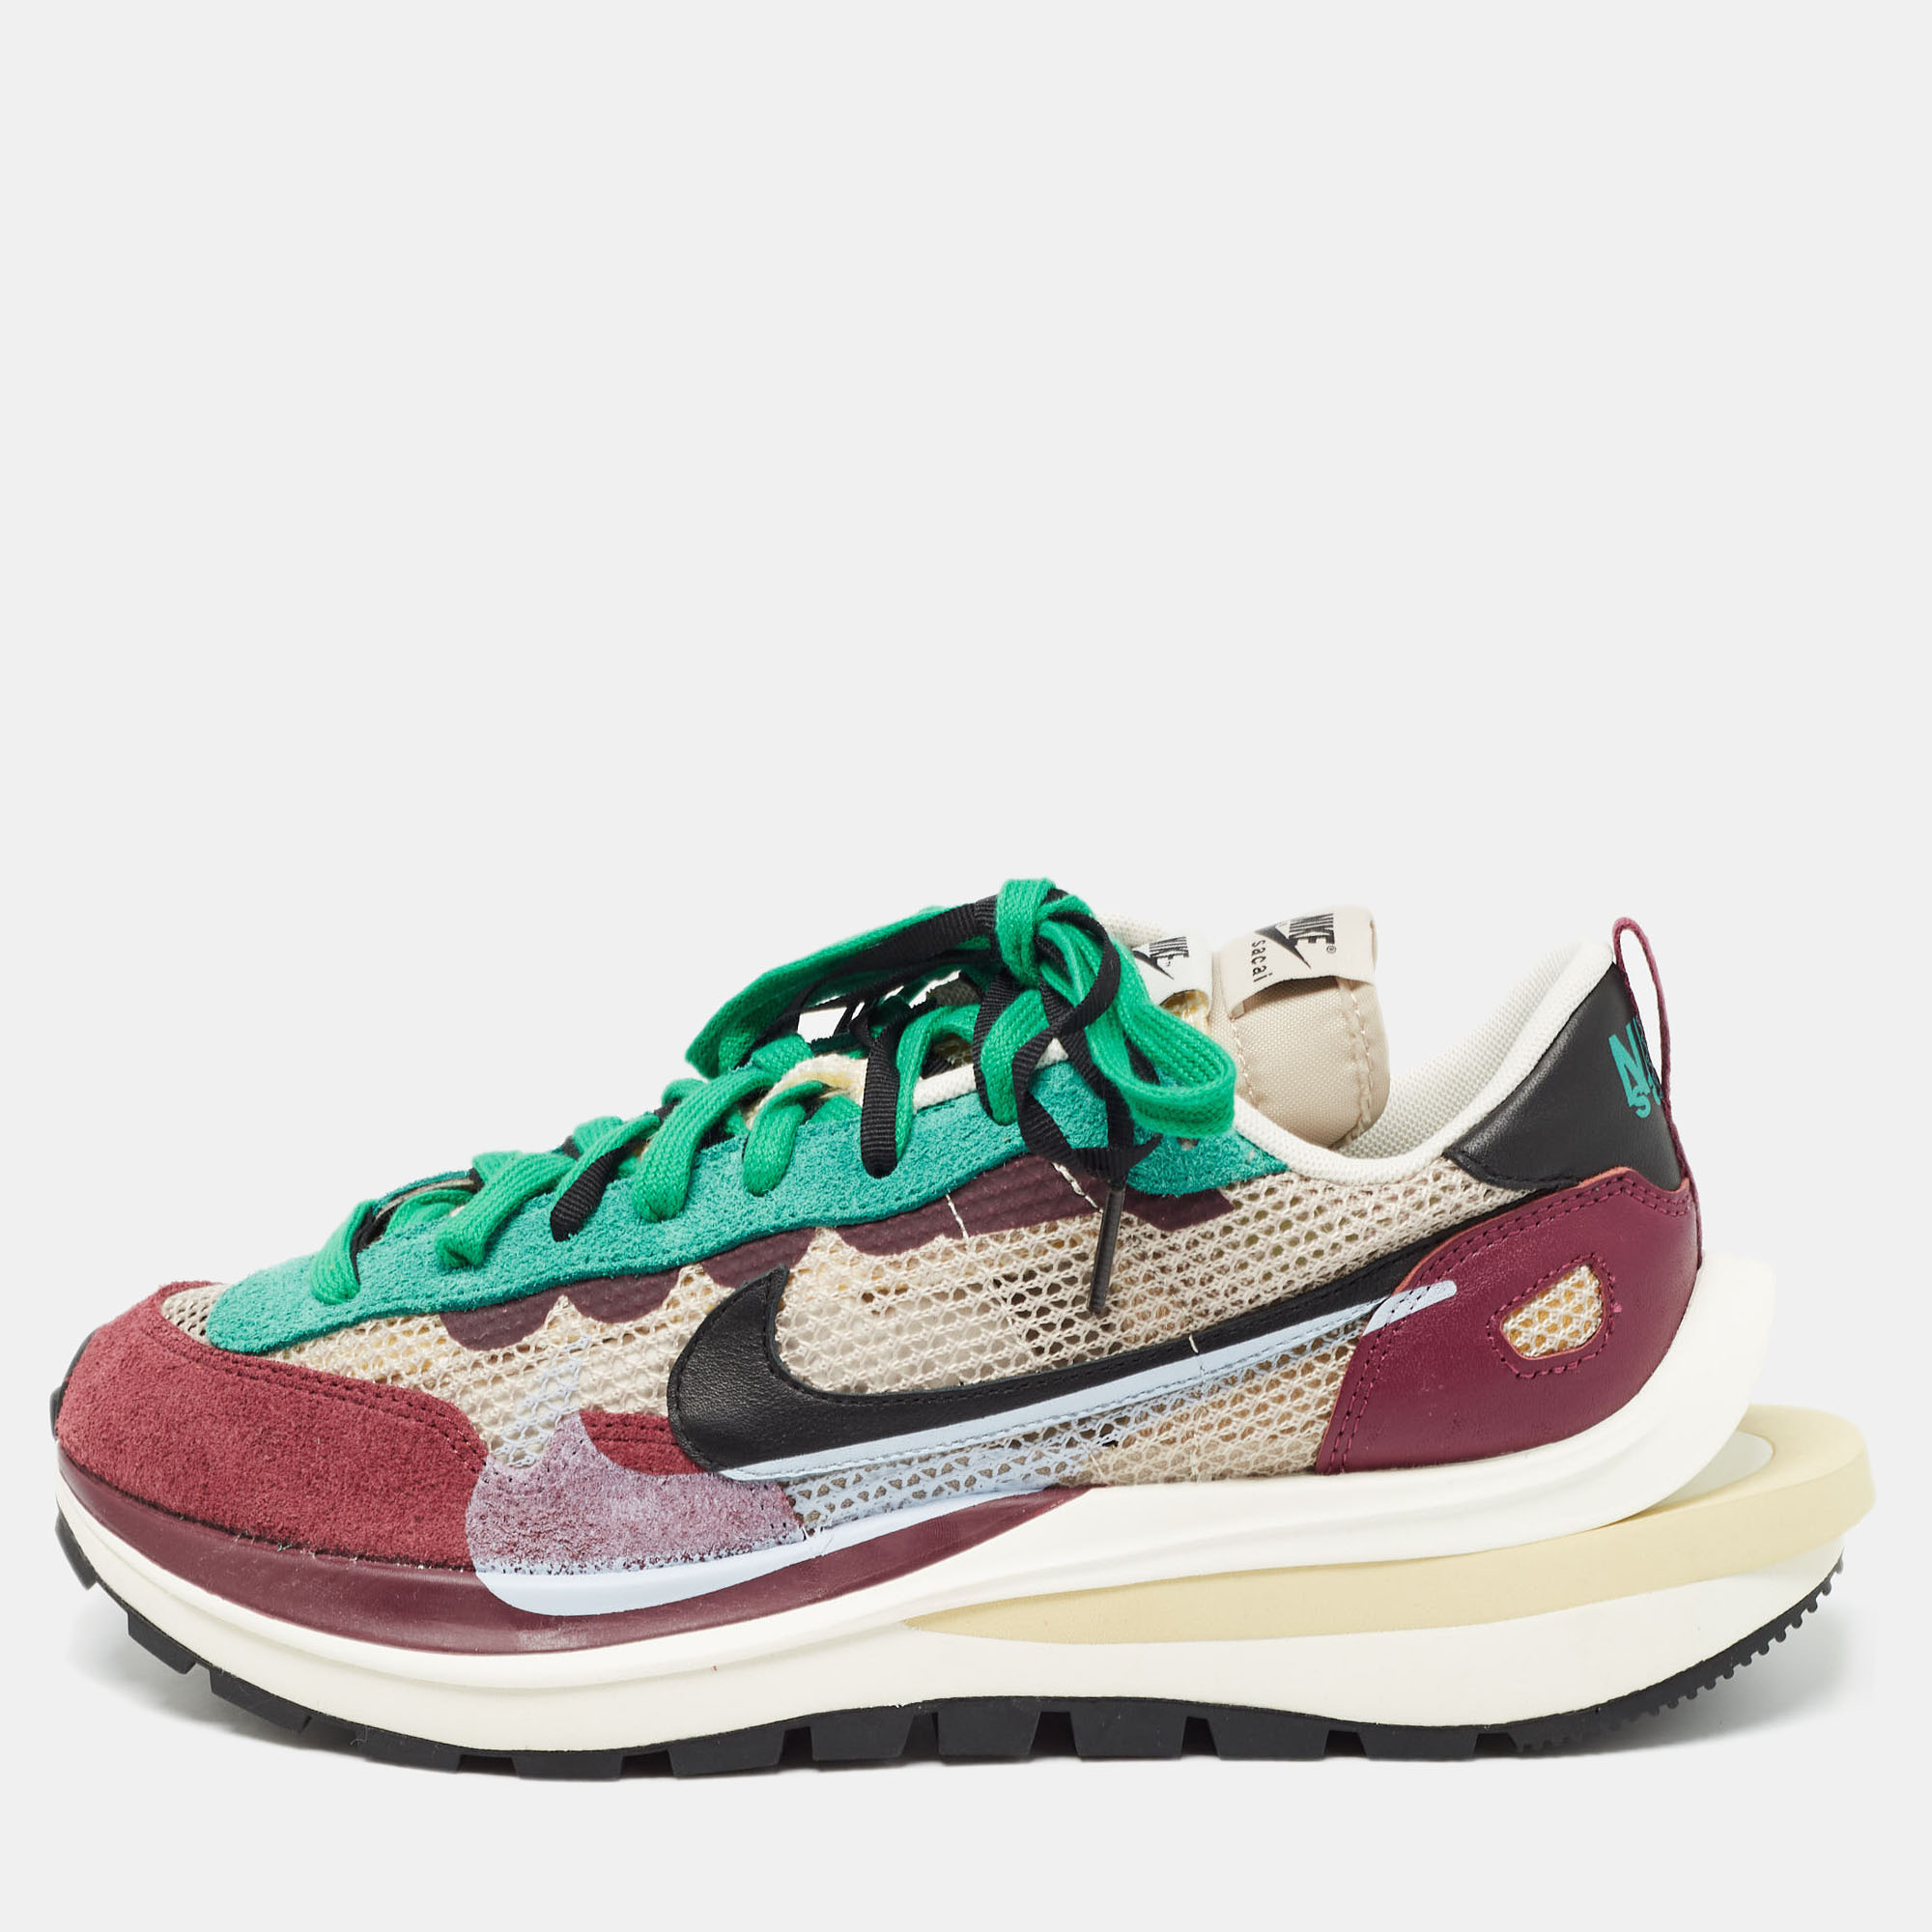 

Nike x Sacai Multicolor Mesh and Suede Vaporwaffle Sneakers Size